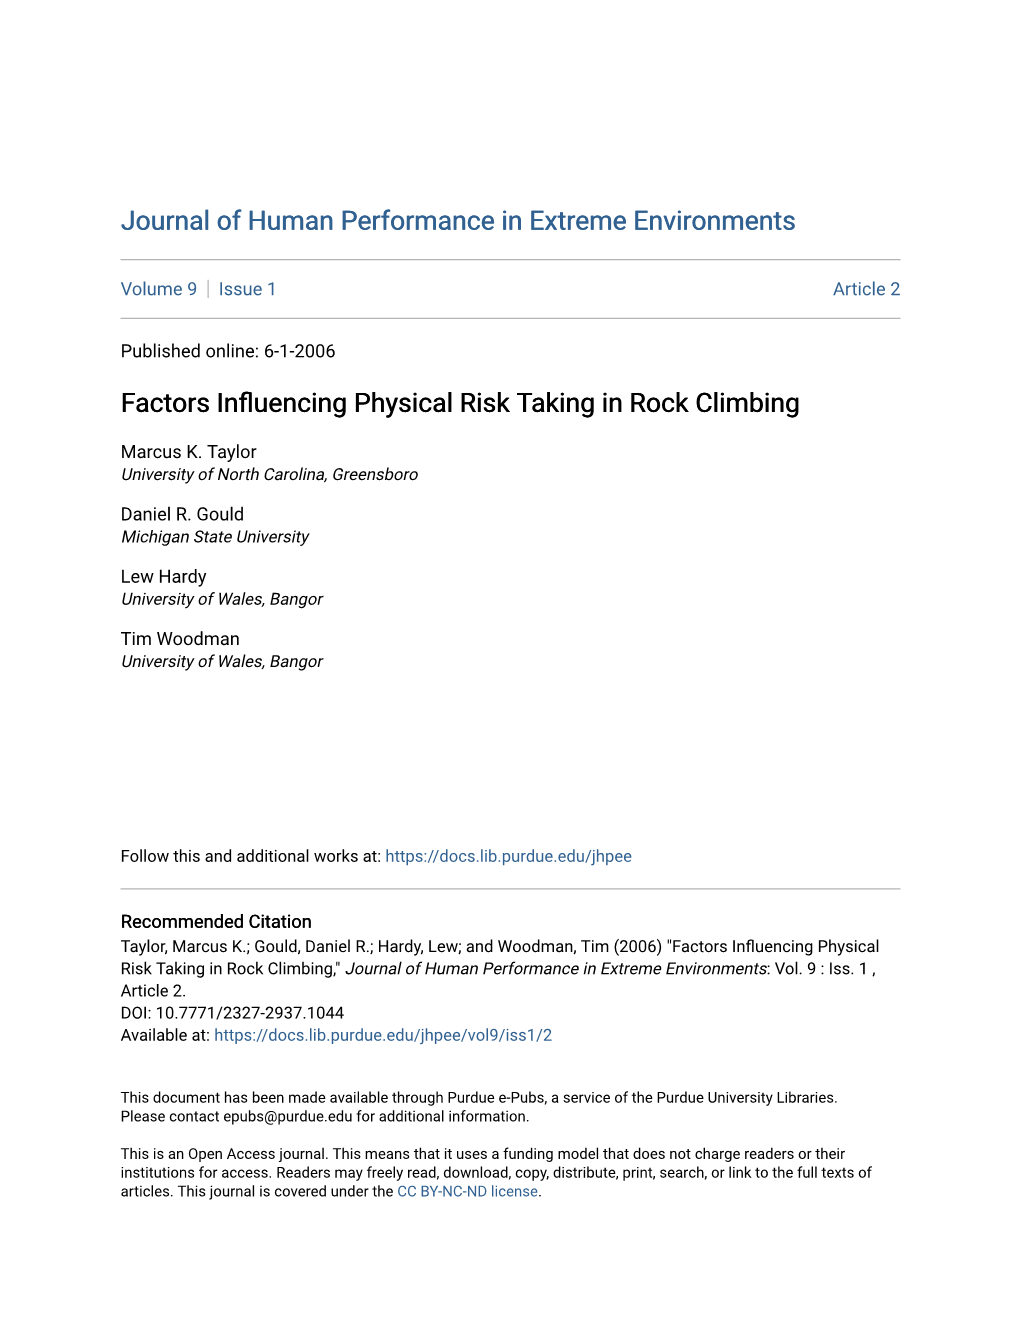 Factors Influencing Physical Risk Taking in Rock Climbing," Journal of Human Performance in Extreme Environments: Vol